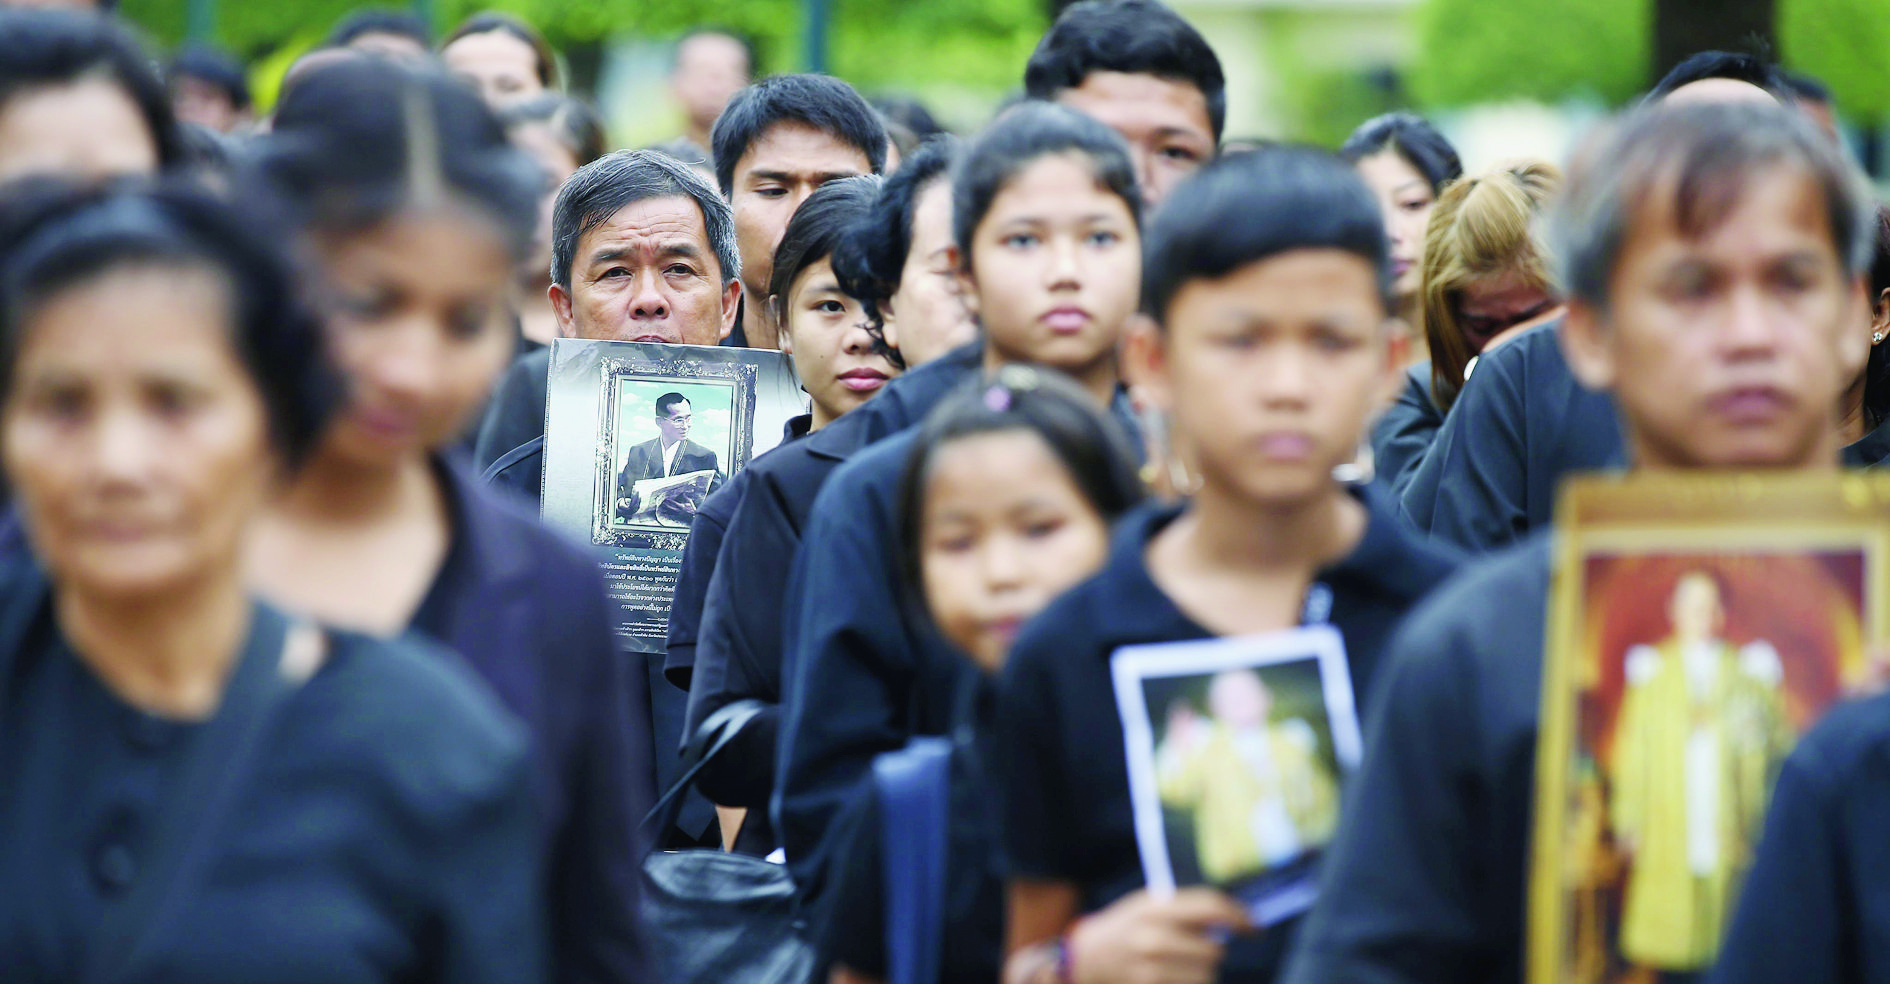 epaselect epa05607922 Thai mourners hold portraits of late Thai King Bhumibol Adulyadej as they queue up to pay obeisance to the Royal Urn of the late monarch, inside the Dusit Maha Prasat Throne Hall, at the Grand Palace in Bangkok, Thailand, 29 October 2016. King Bhumibol, the world's longest reigning monarch, died at the age of 88 in Siriraj Hospital in Bangkok on 13 October 2016.  EPA/NARONG SANGNAK epaselect THAILAND ROYALTY KING MOURNING